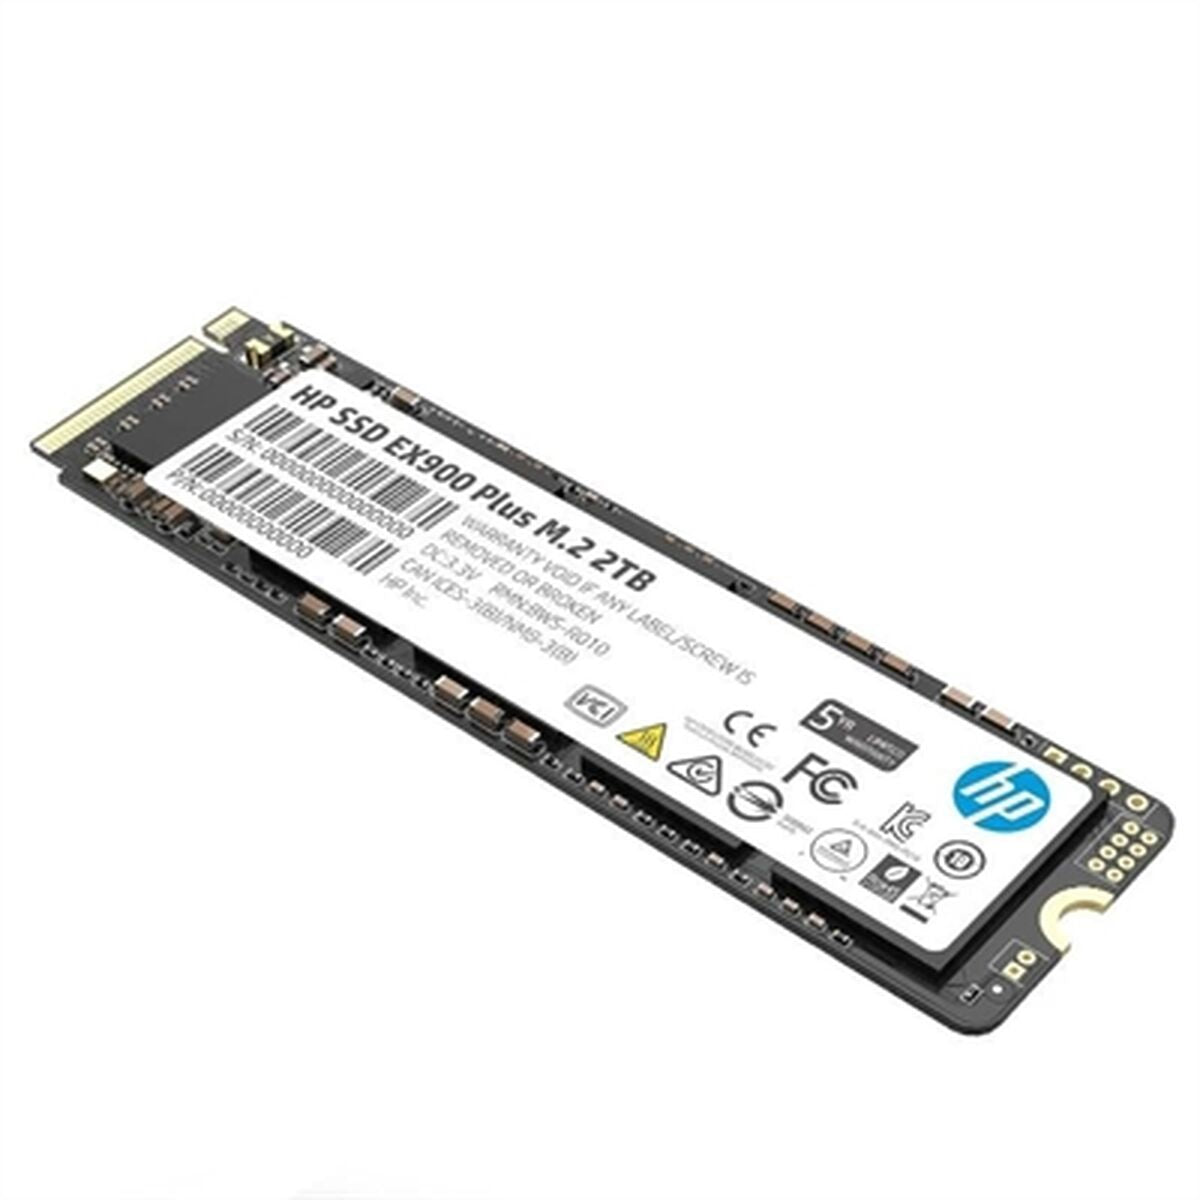 Hard Drive HP EX900 Plus 2 TB SSD, HP, Computing, Data storage, hard-drive-hp-ex900-plus-2-tb-ssd, Brand_HP, category-reference-2609, category-reference-2803, category-reference-2806, category-reference-t-19685, category-reference-t-19909, category-reference-t-21357, category-reference-t-25639, computers / components, Condition_NEW, Price_100 - 200, Teleworking, RiotNook